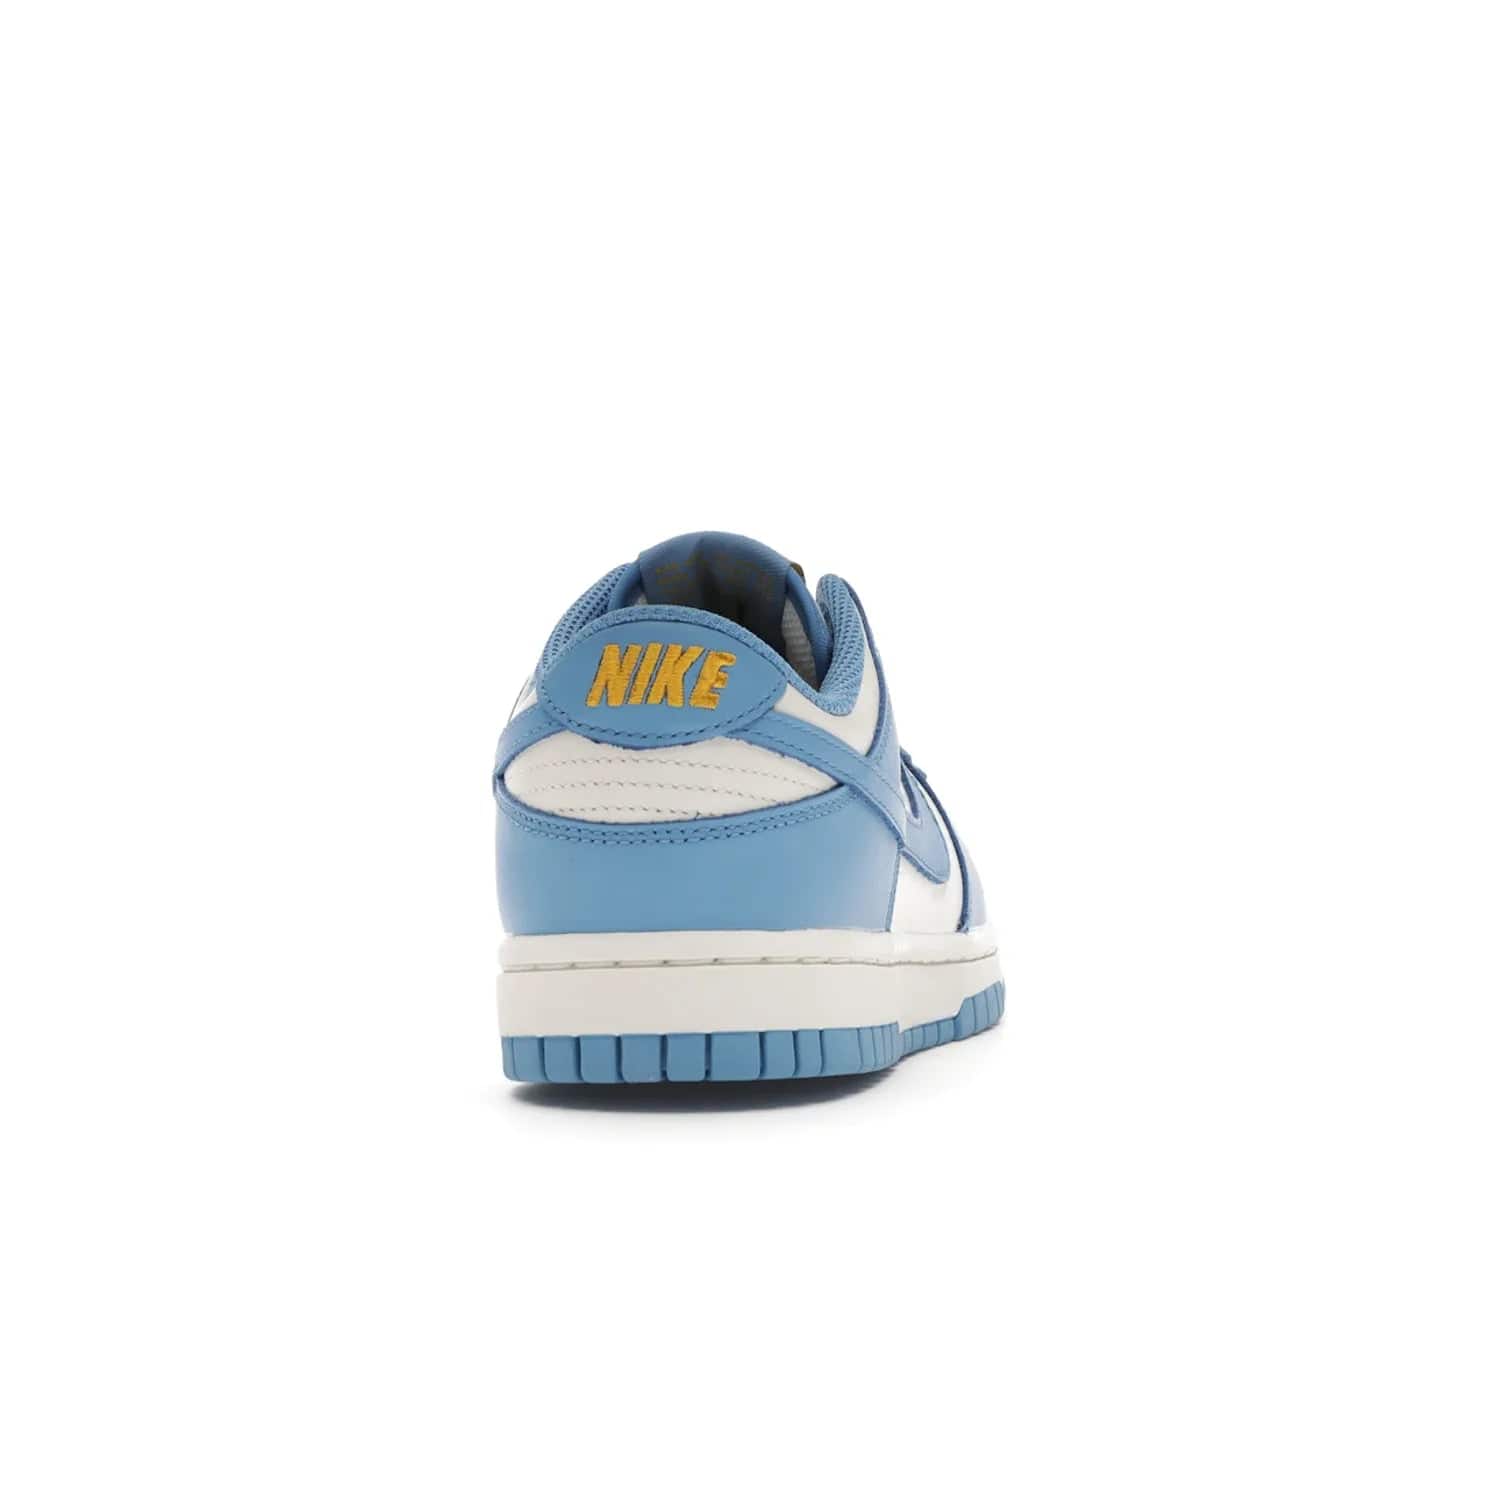 Nike Dunk Low Coast (Women's) - Image 29 - Only at www.BallersClubKickz.com - Iconic UCLA colors honor the west coast with the Nike Dunk Low Coast (Women's), a bold combo of light blue, white and yellow. Light leather upper with white midsole and light EVA outsole offer a modern twist. Released Feb 2021 for $100.